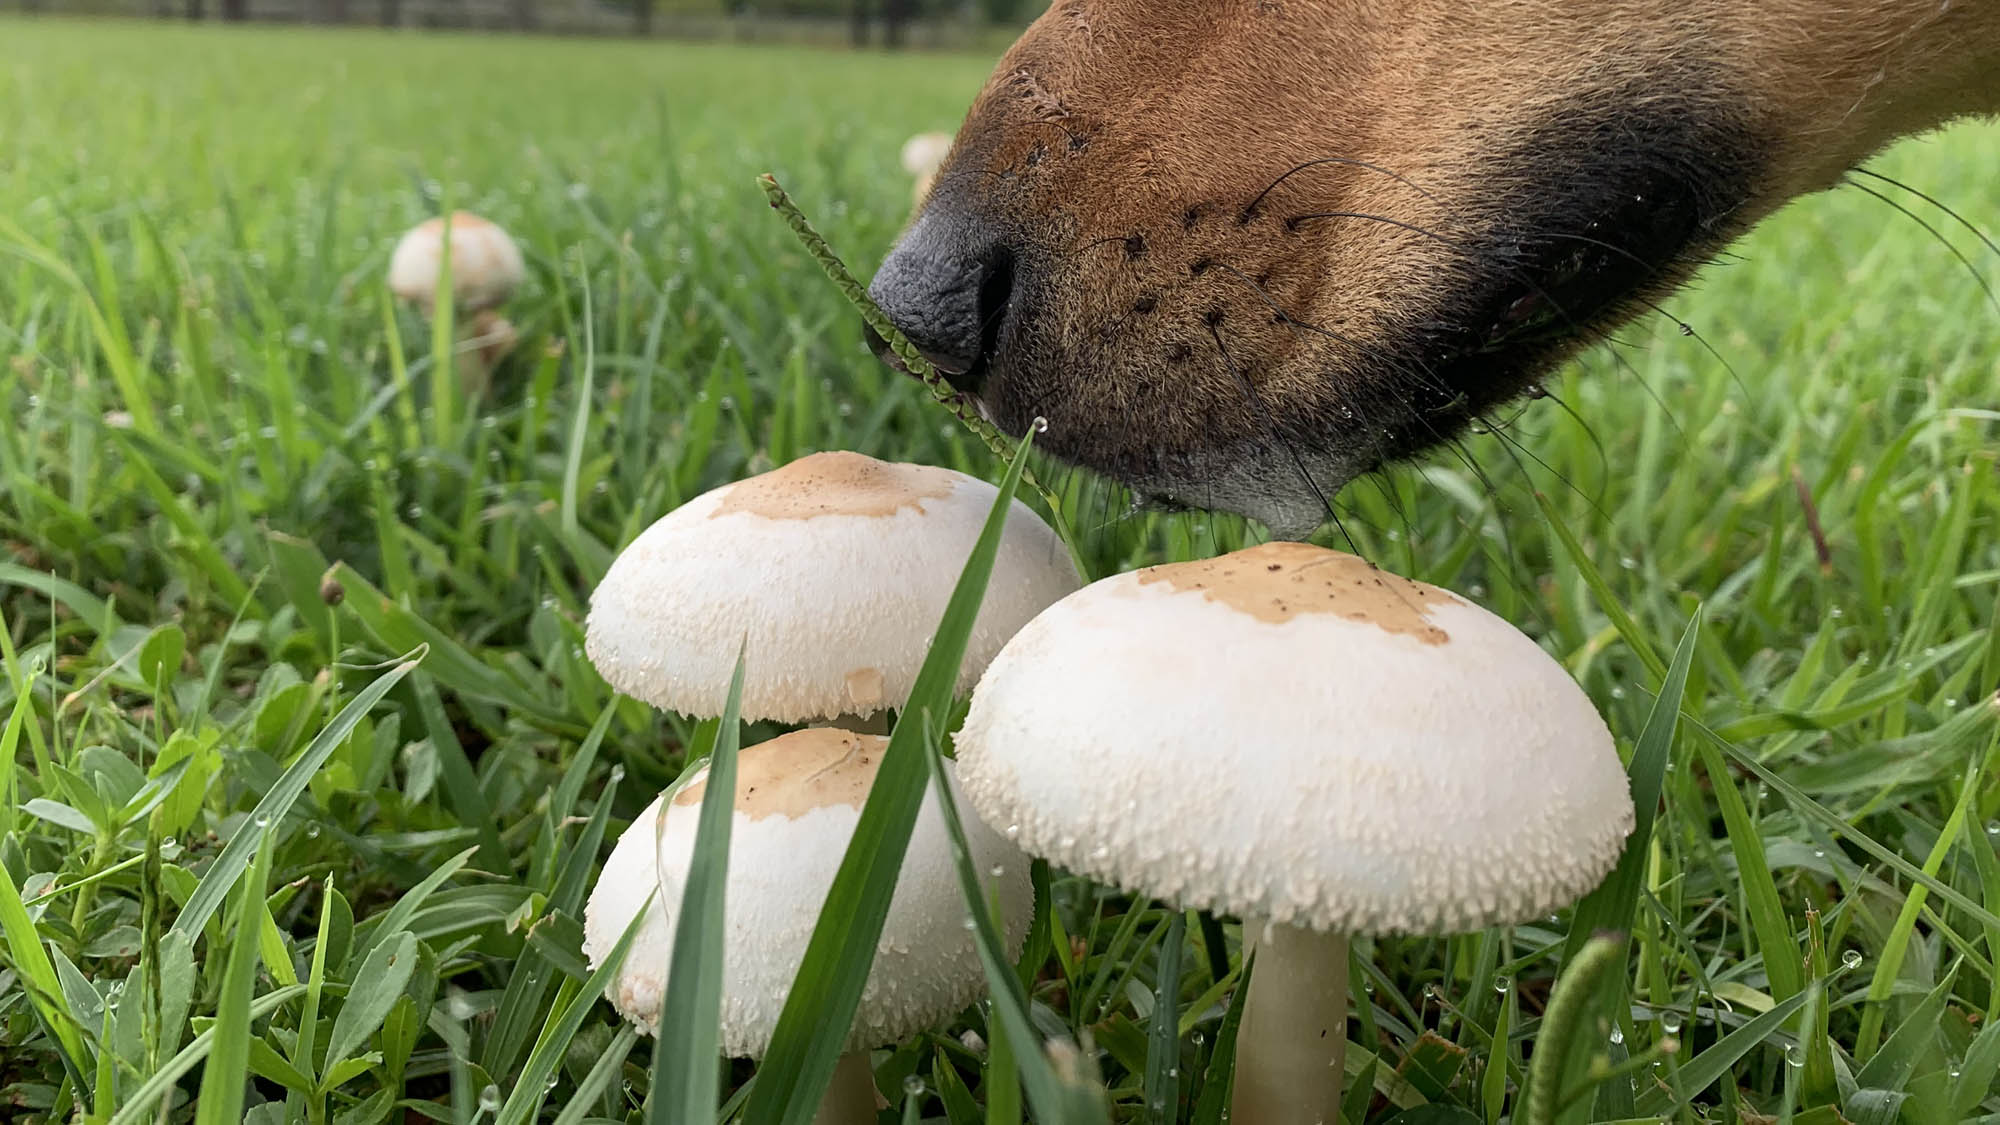 A dog sniffing mushrooms that have grown in a backyard.